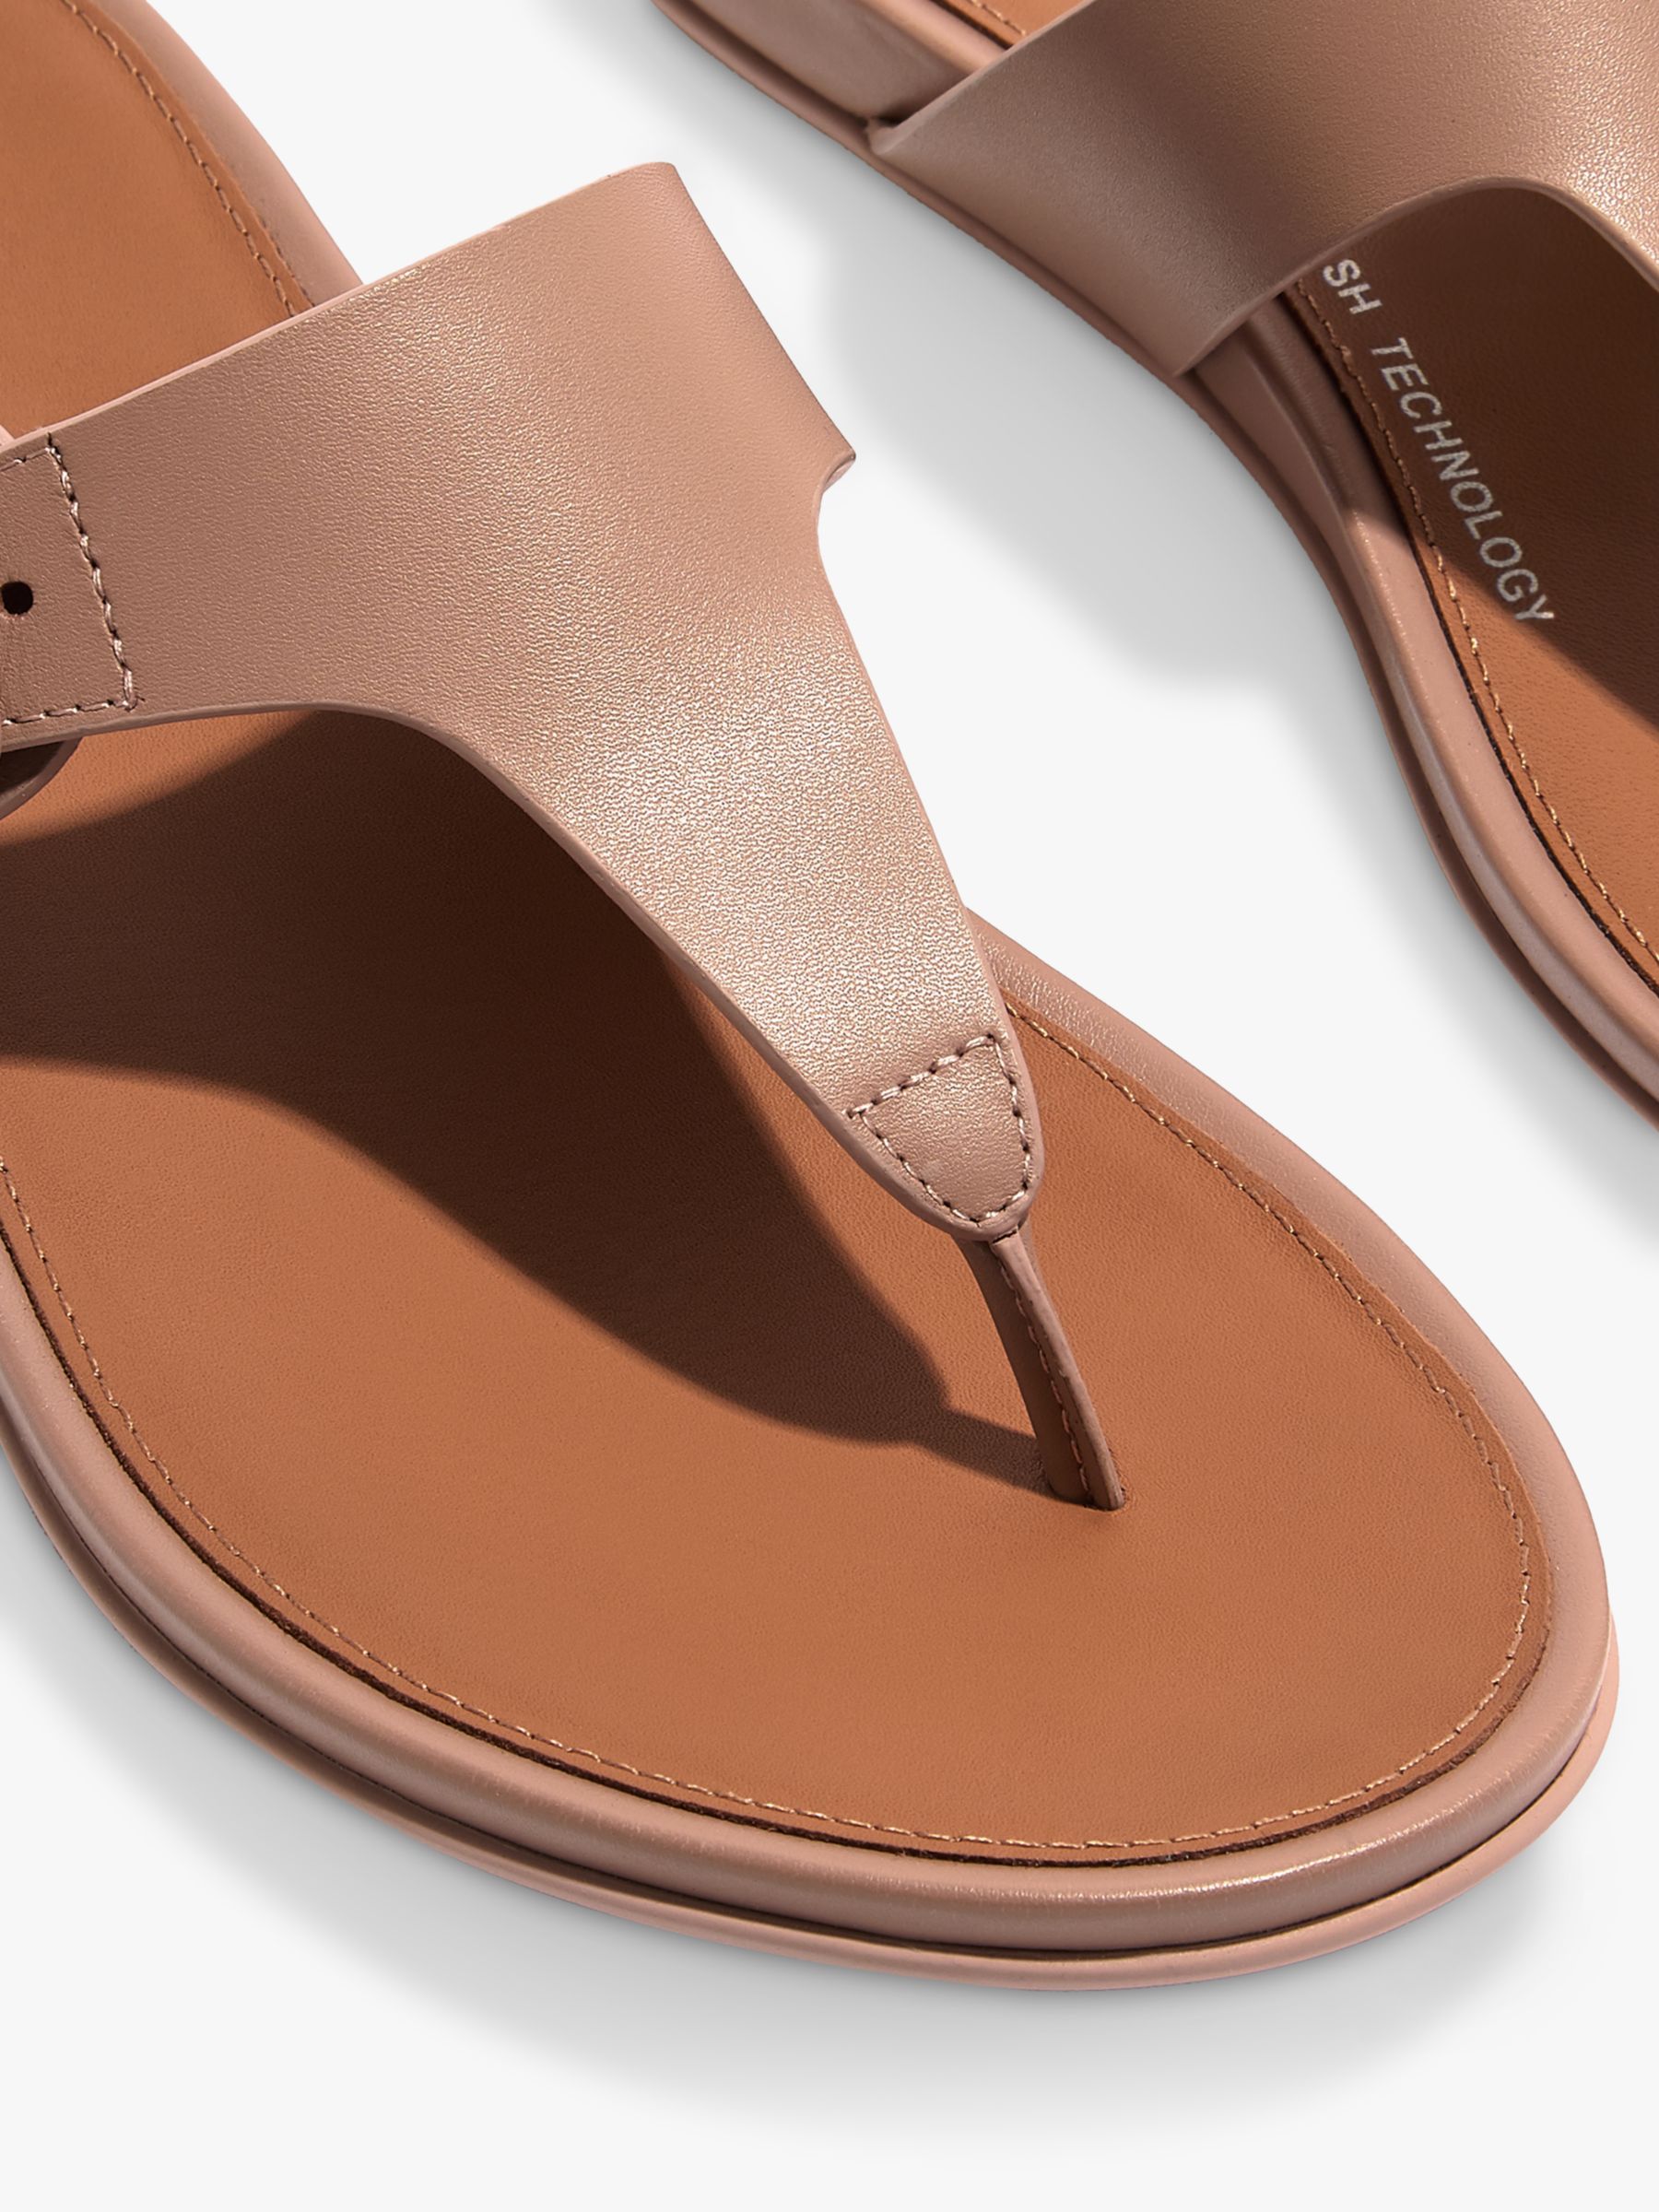 FitFlop Gracie Leather Toe Post Sandals, Beige at John Lewis